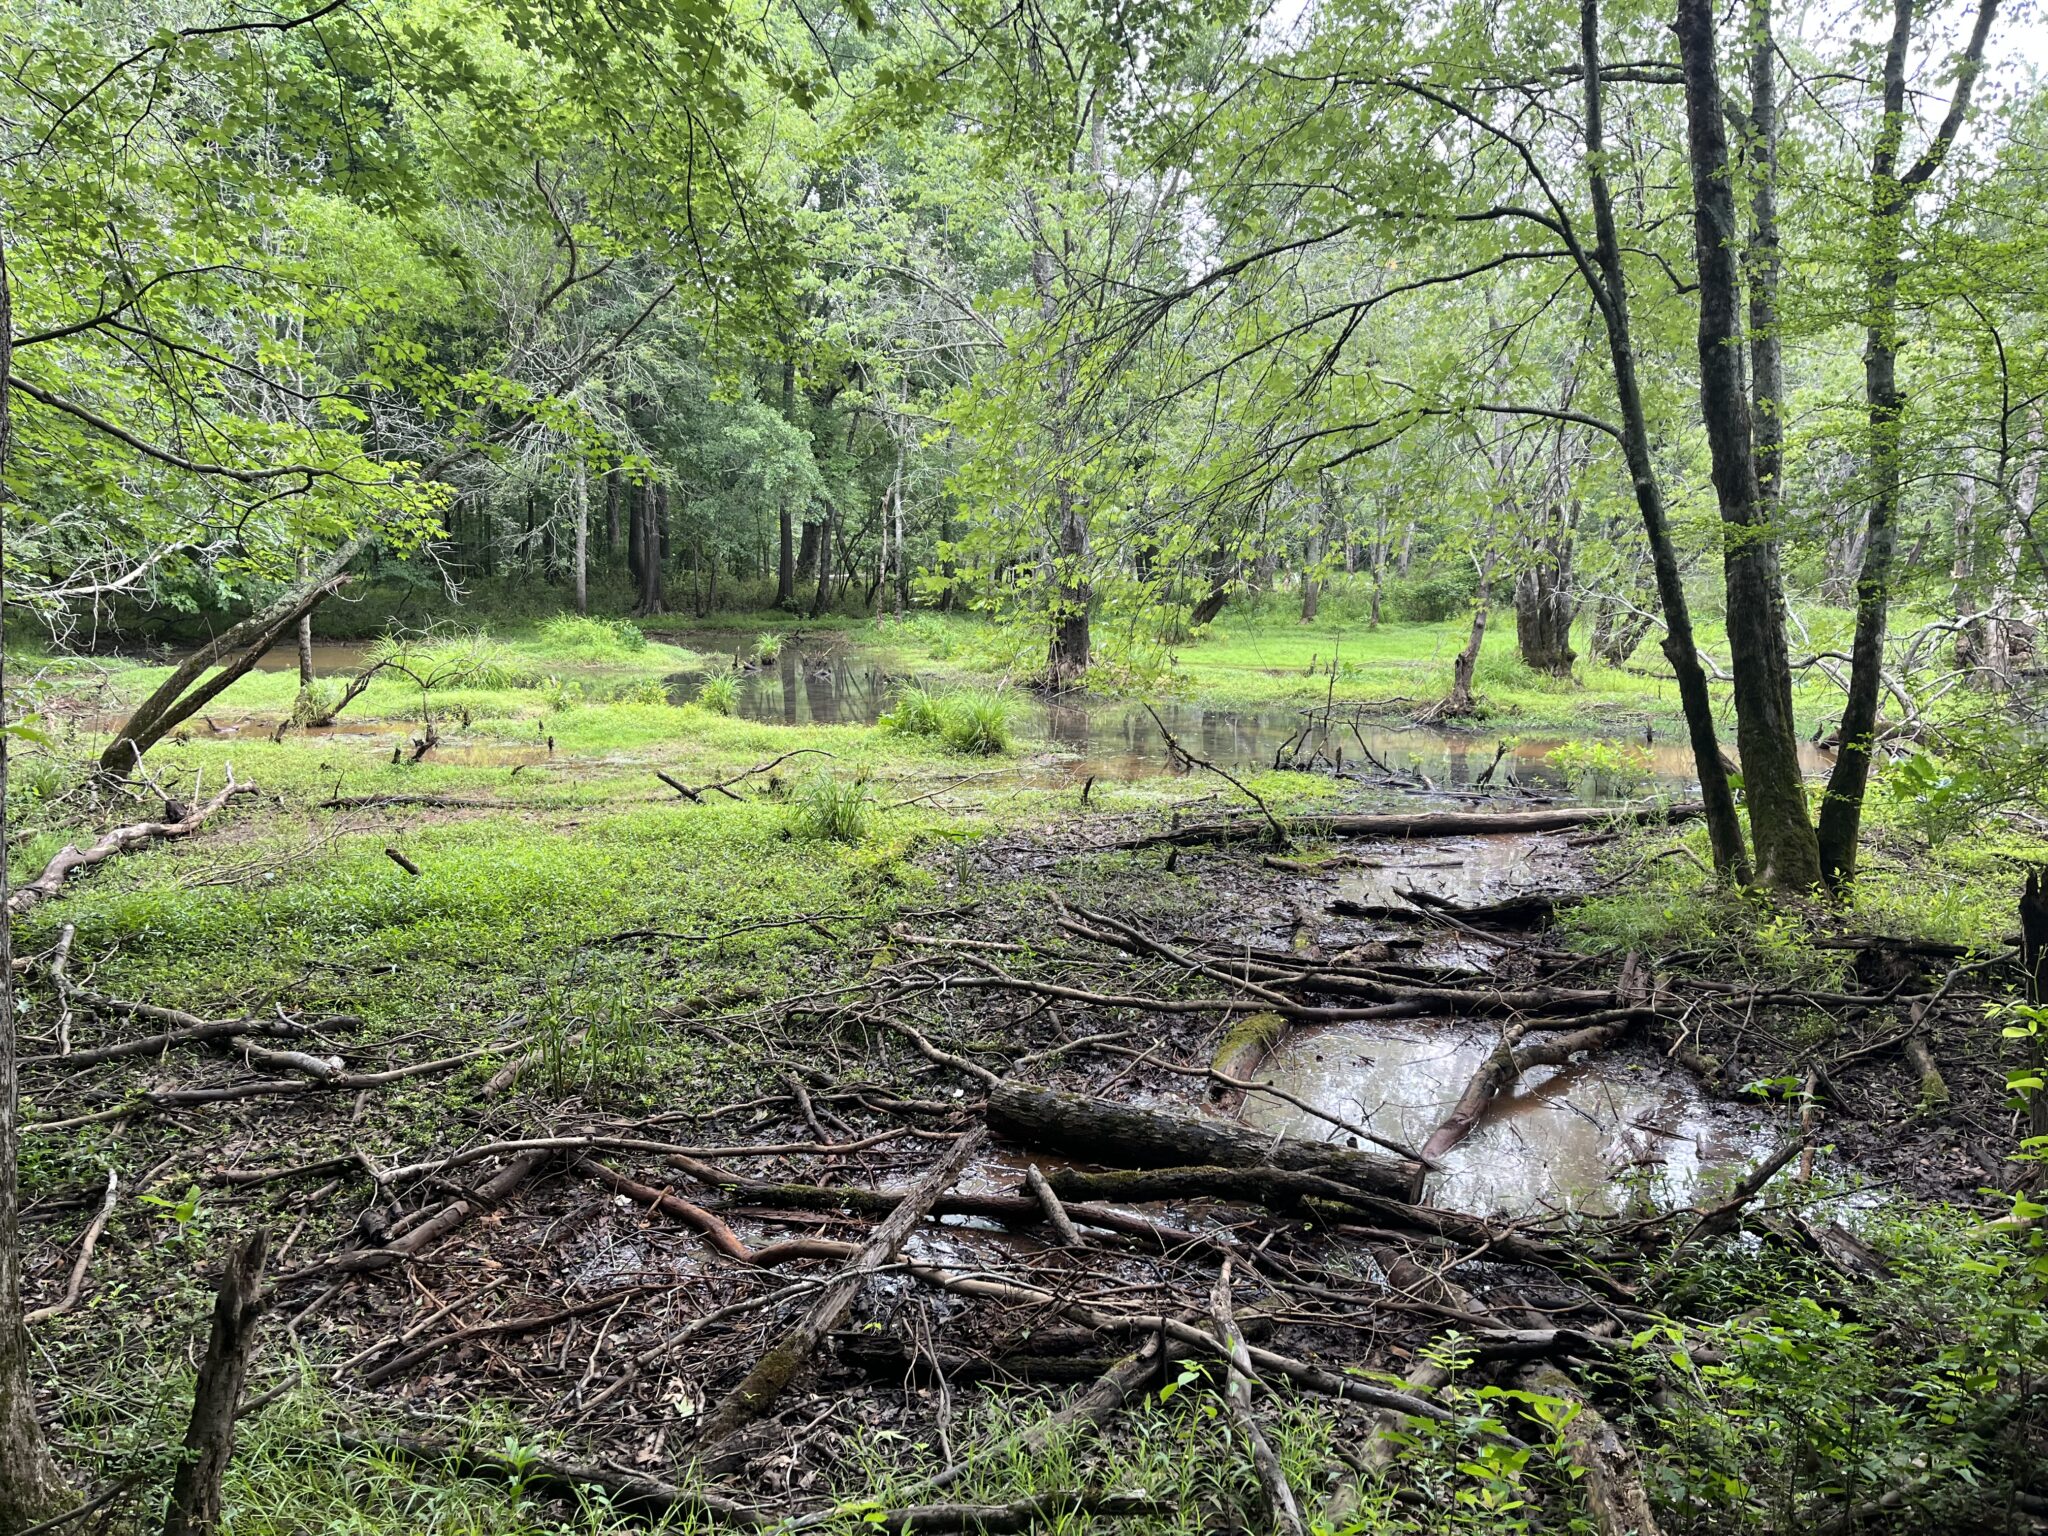 A swampy wetland with fallen branches and patches of mud on the ground.